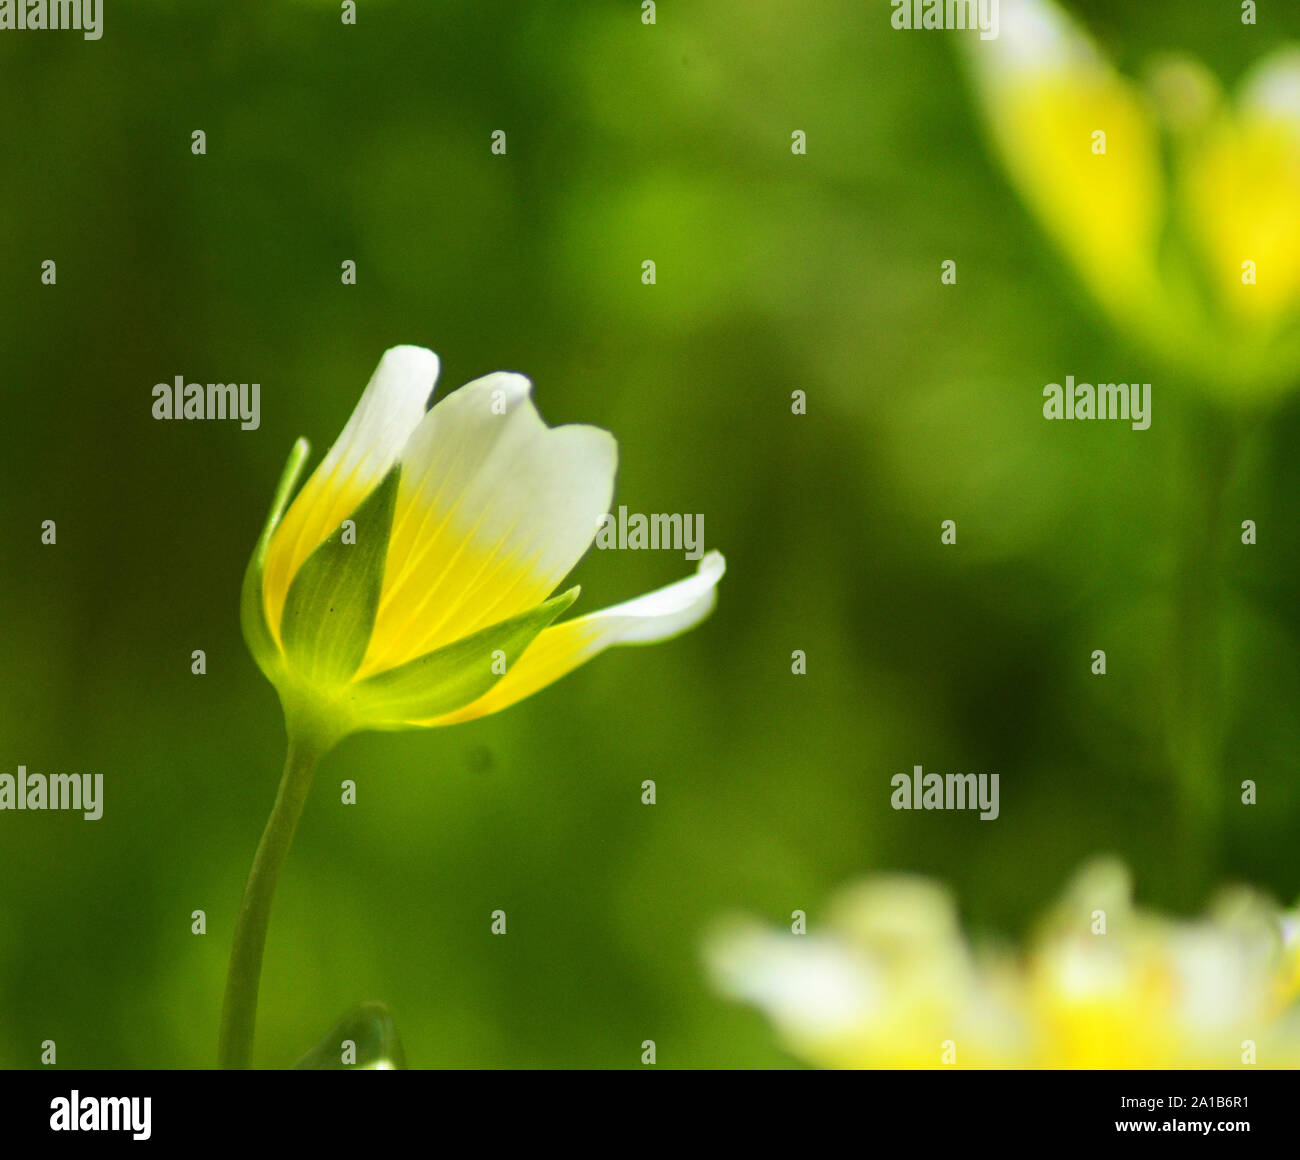 Poached egg plant Limnanthes douglasii white and yellow flowers against sunlight Stock Photo